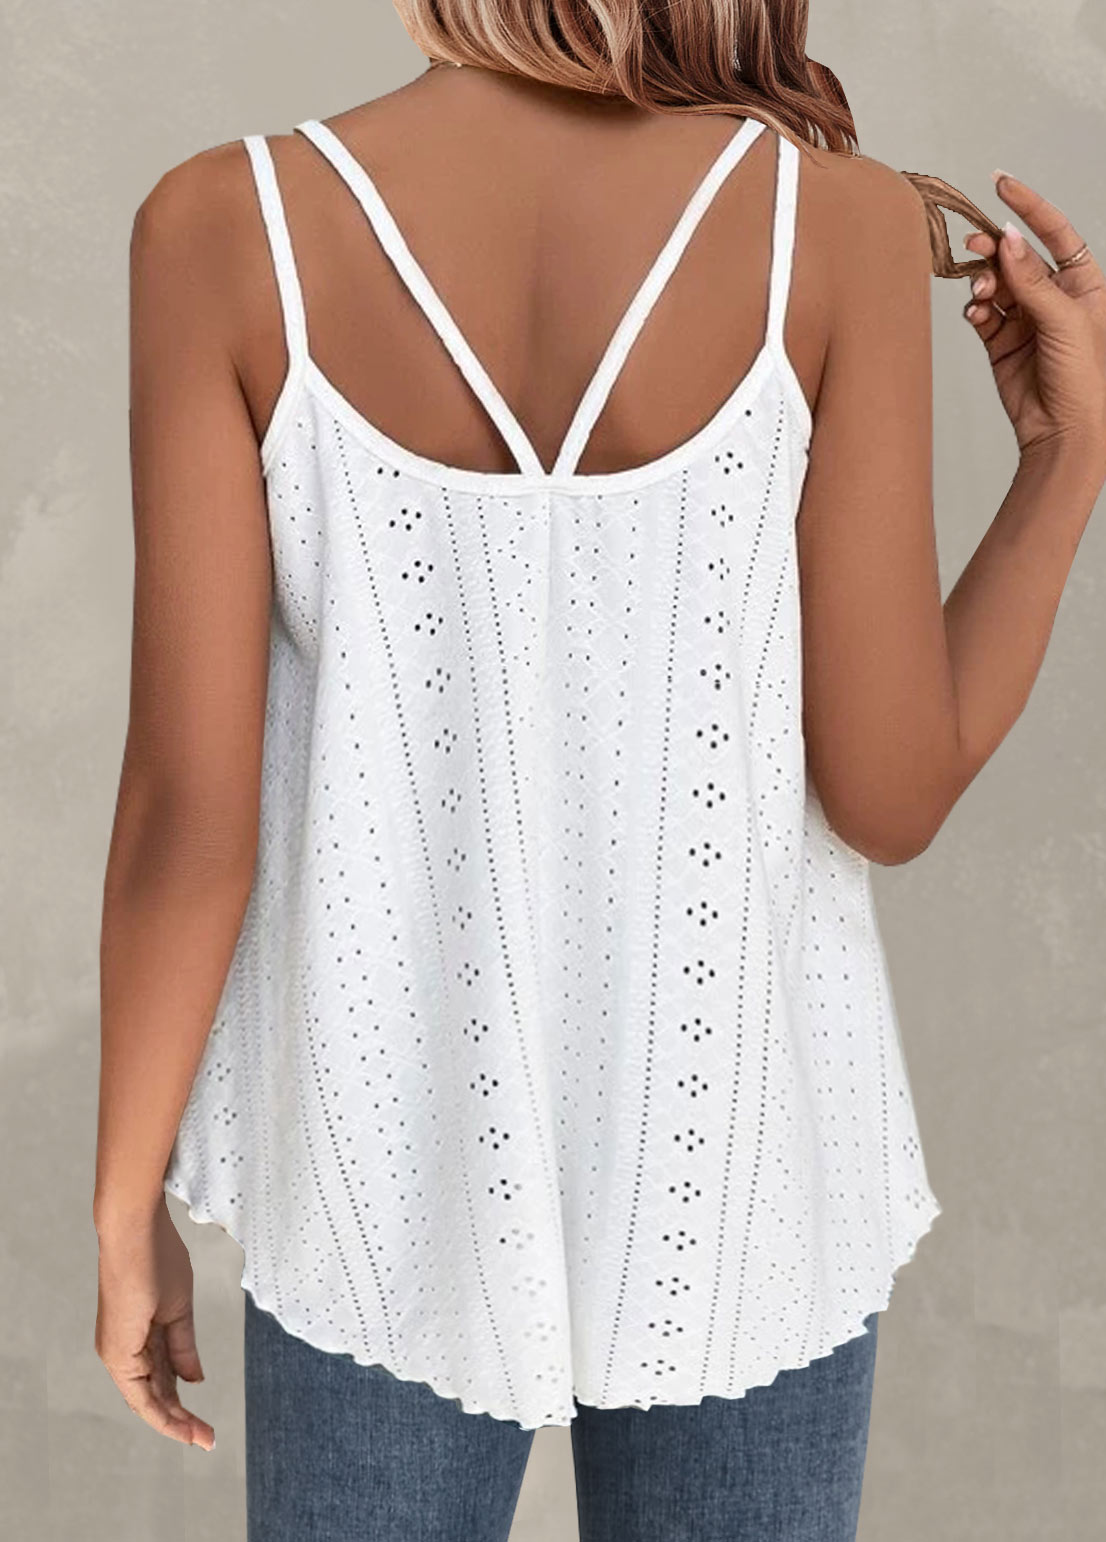 Hole Scoop Neck White Camisole Top